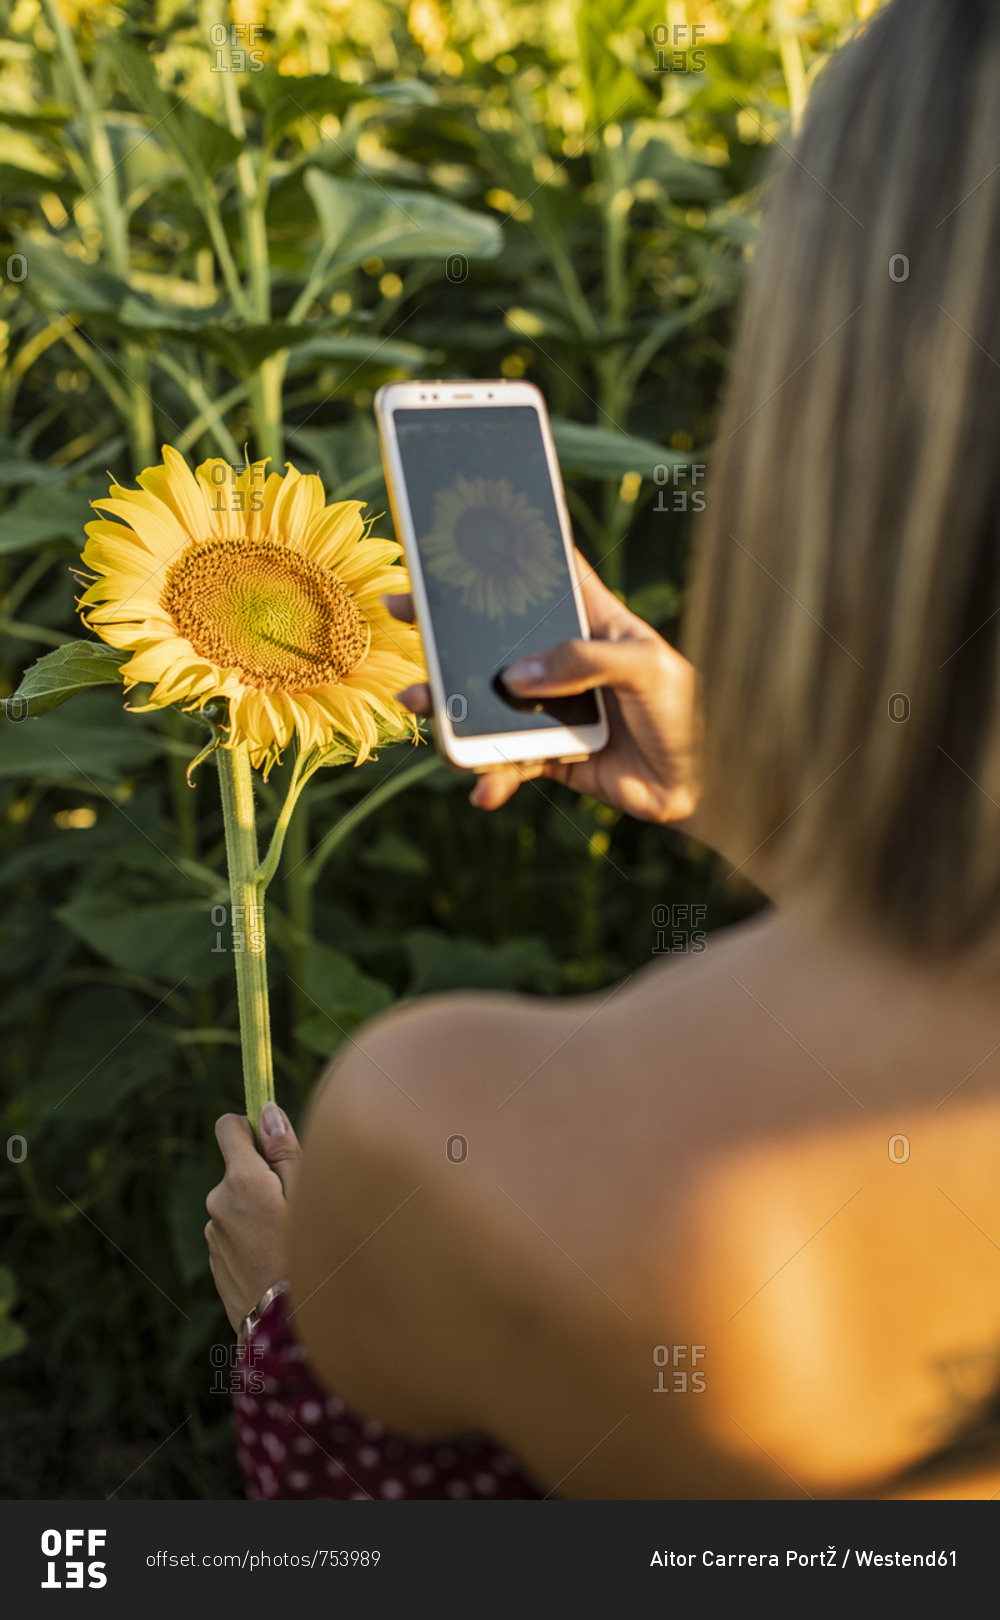 Close-up of woman in a field taking a picture of a sunflower with her smartphone